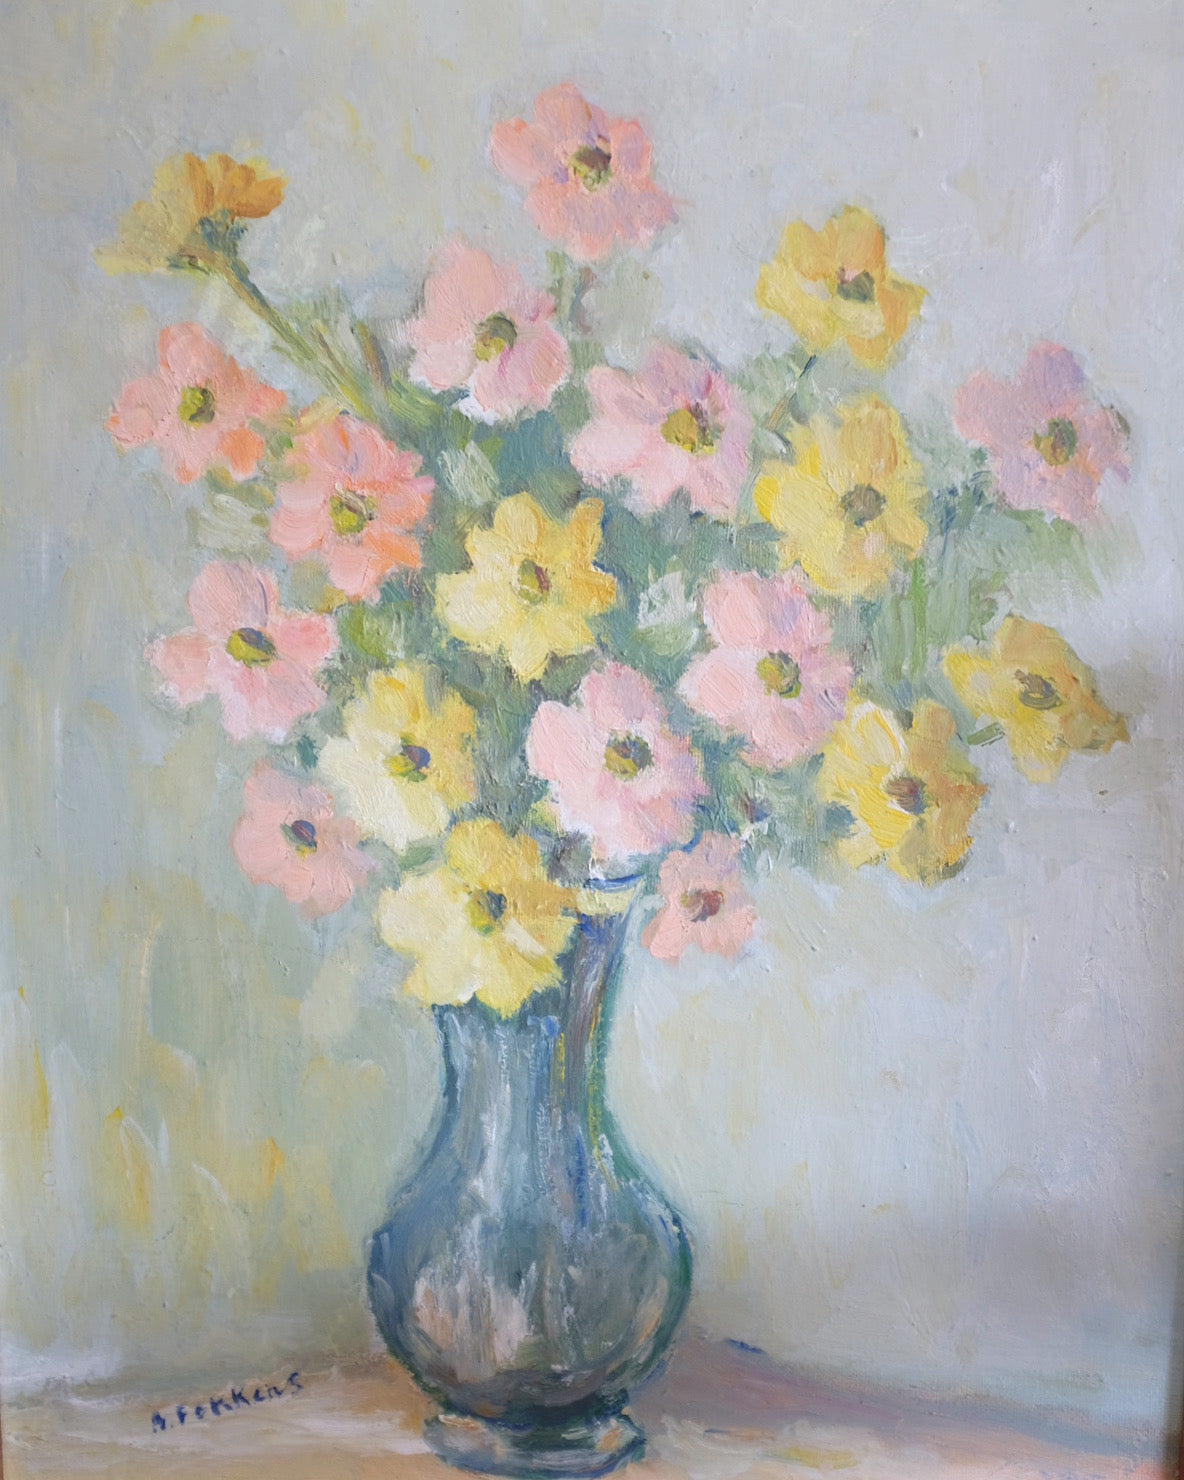 Early 1900's French Bouquet Oil Painting